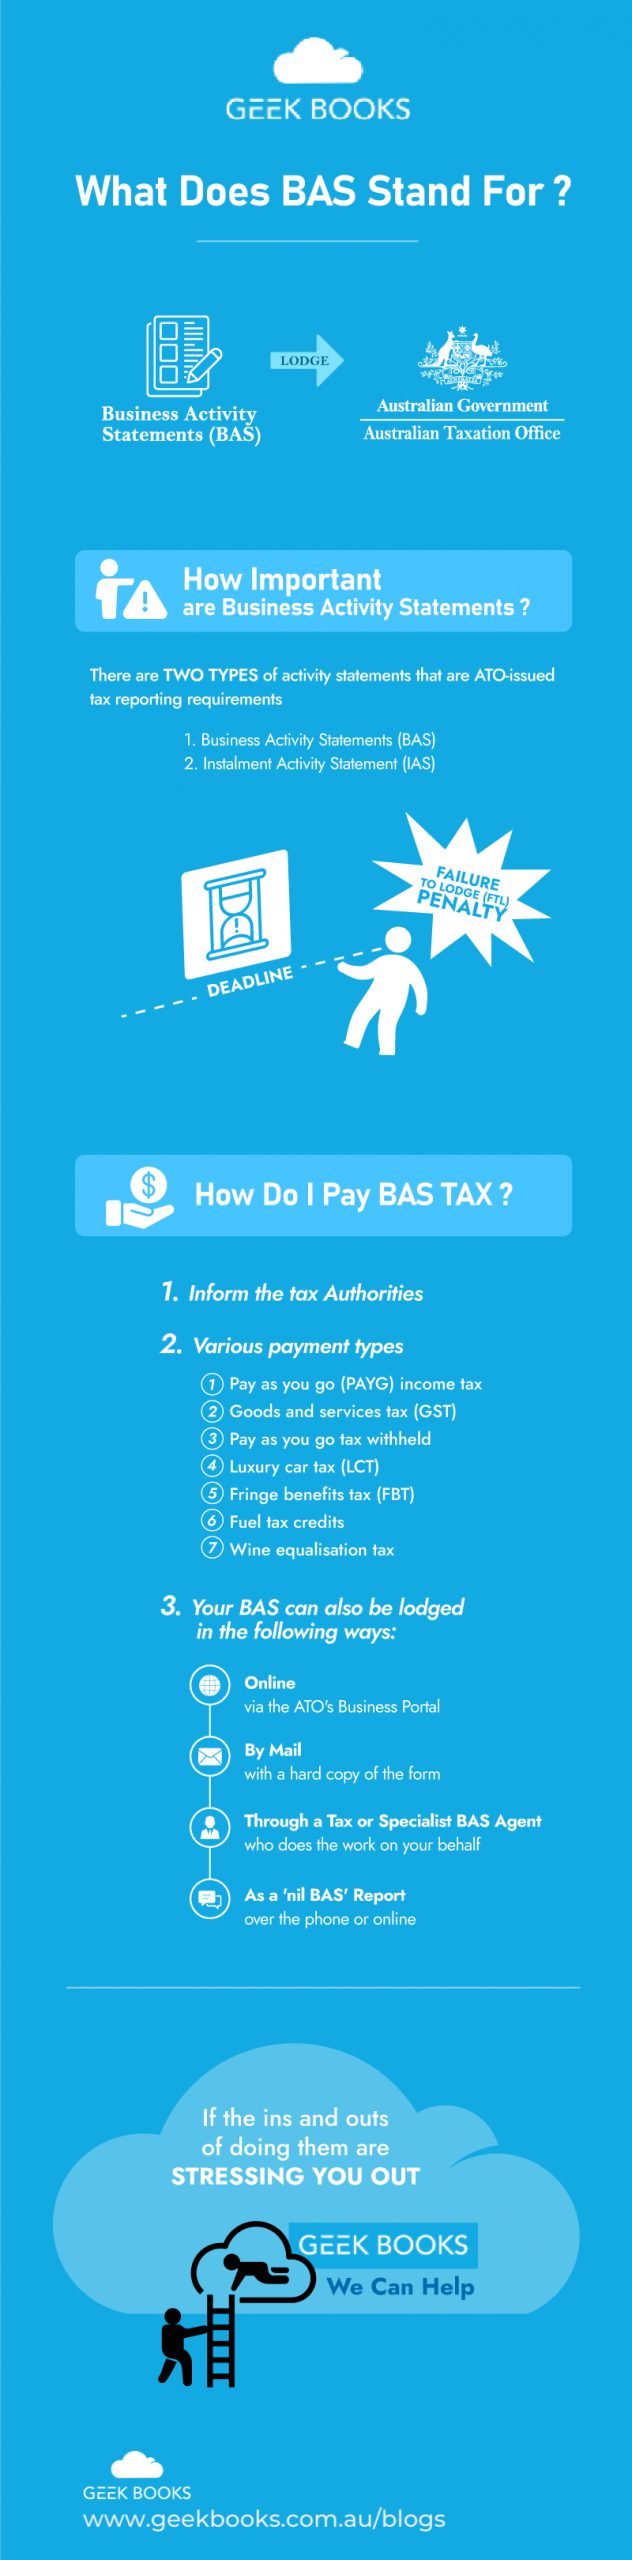 what does bas stand for infographic